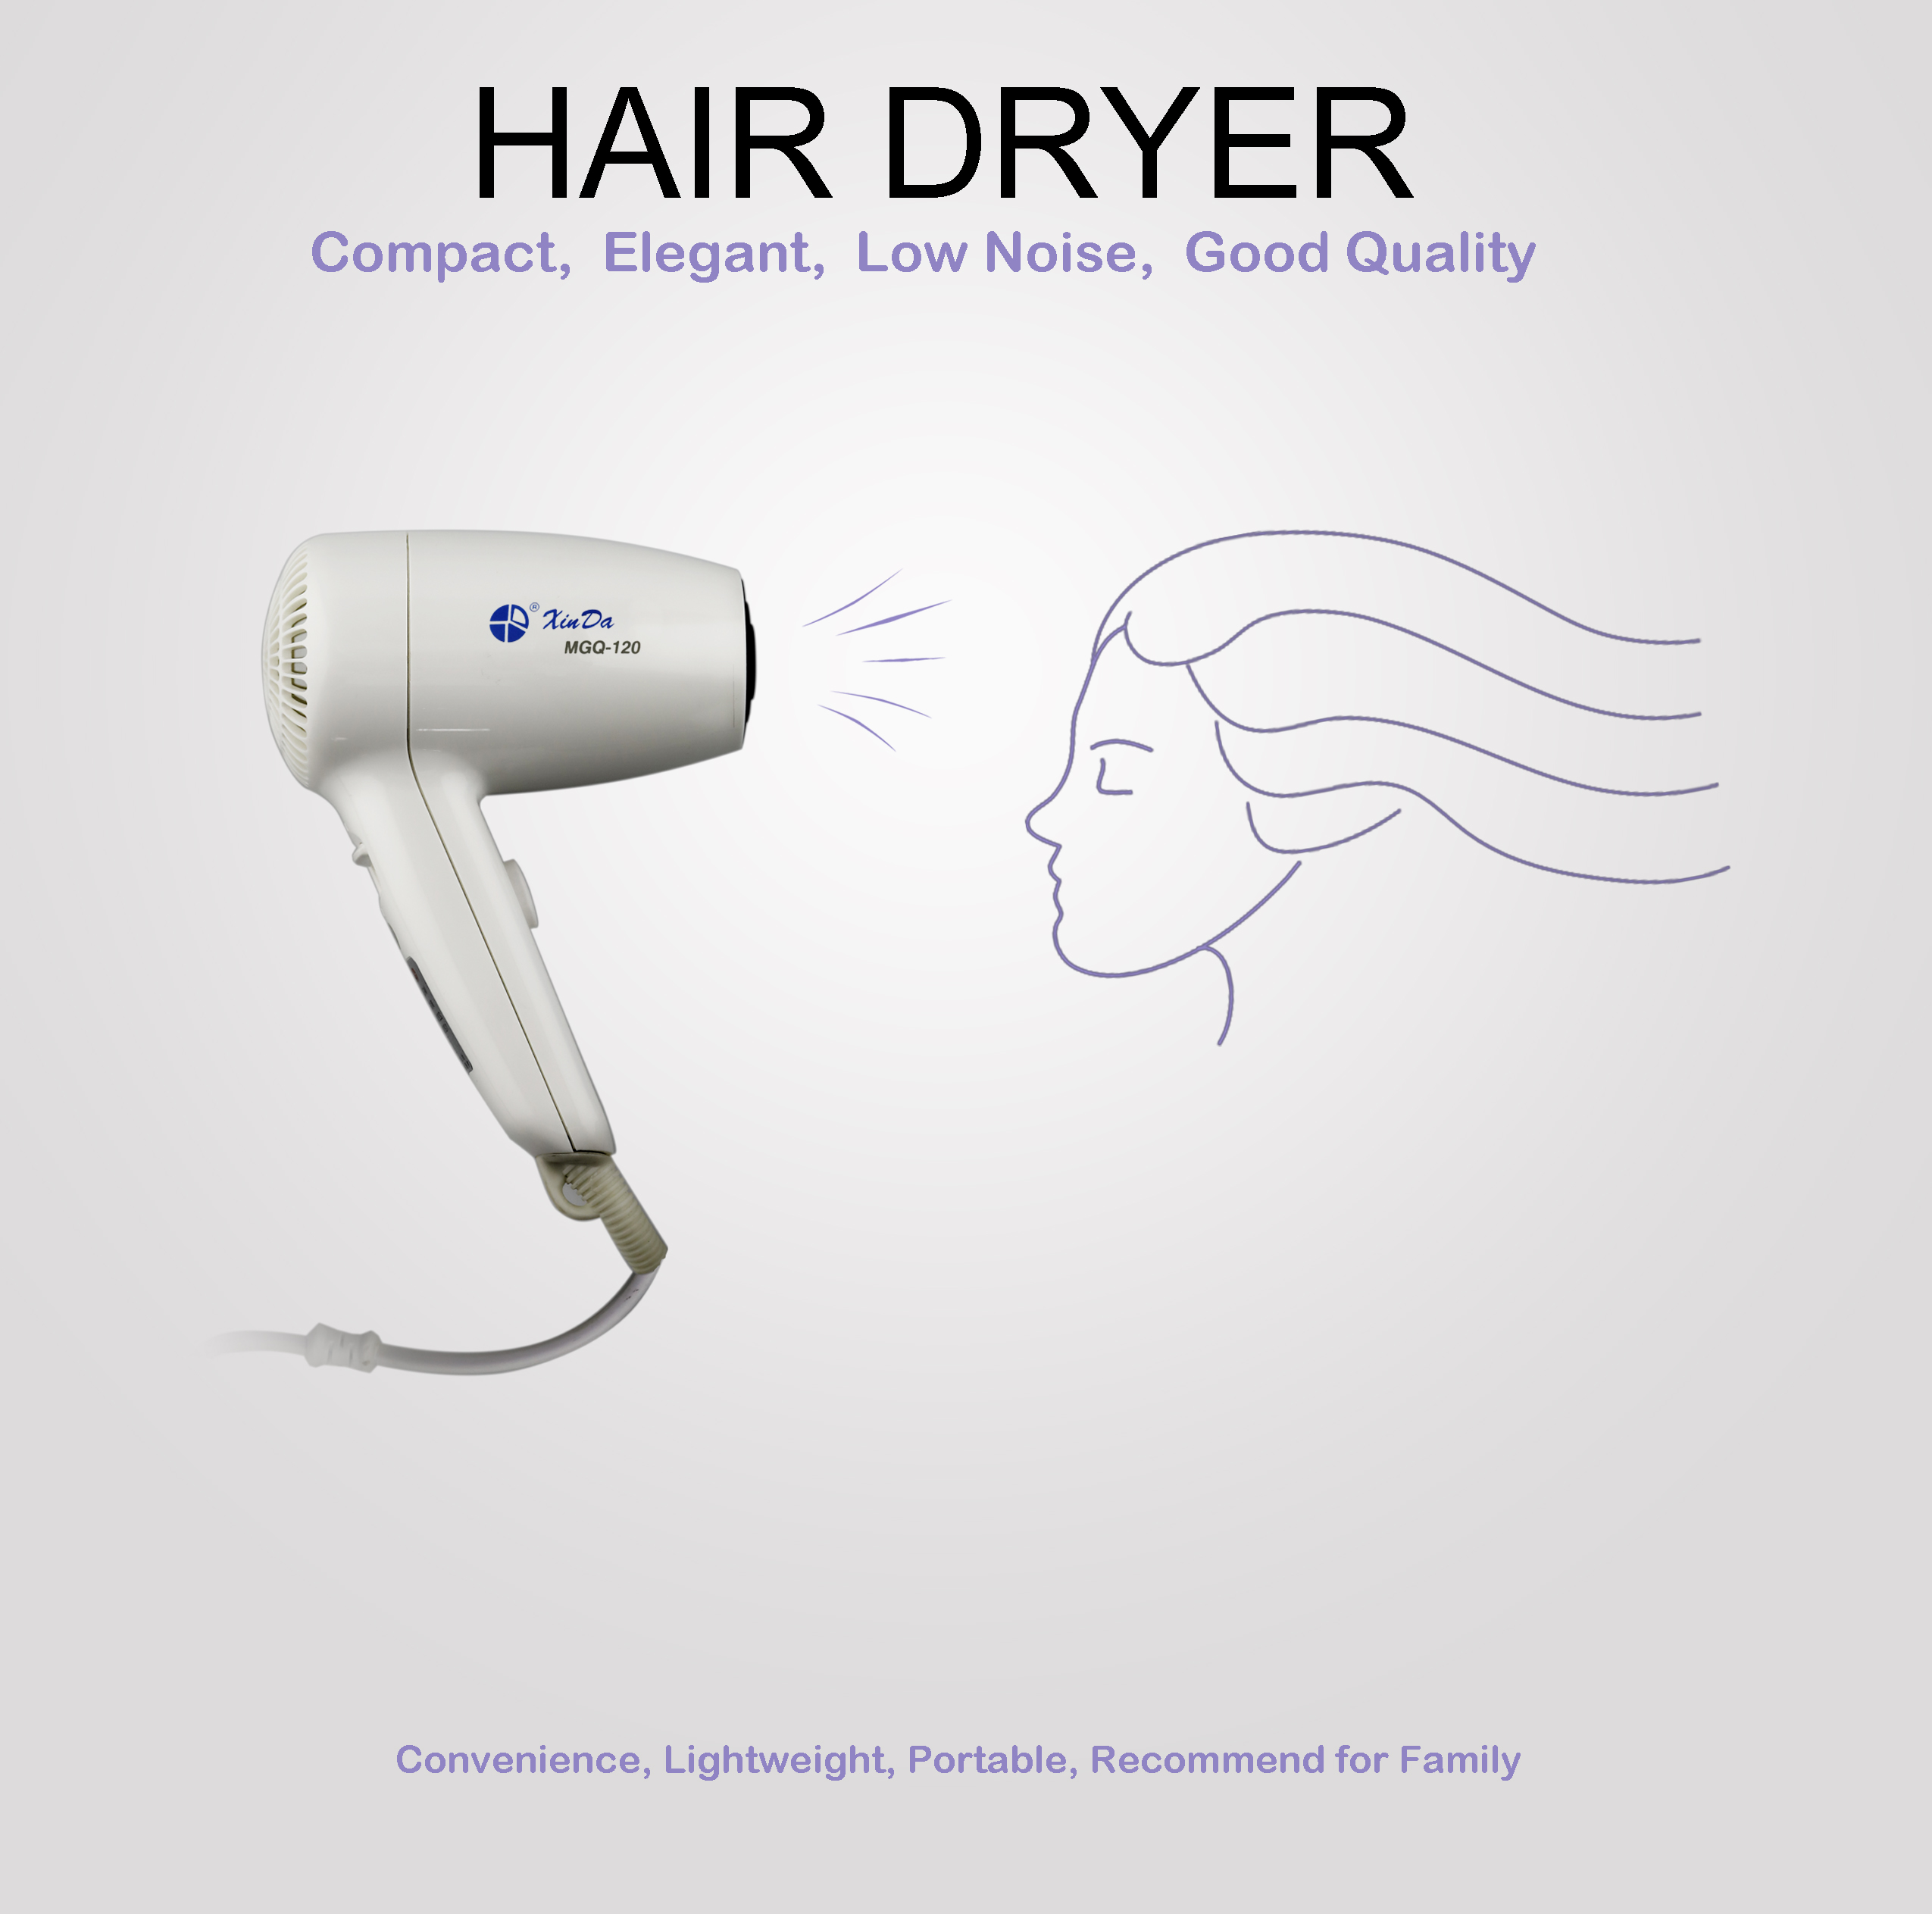 The XinDa MGQ120 2200w Commercial Professional Household Powerful Hair Dryer